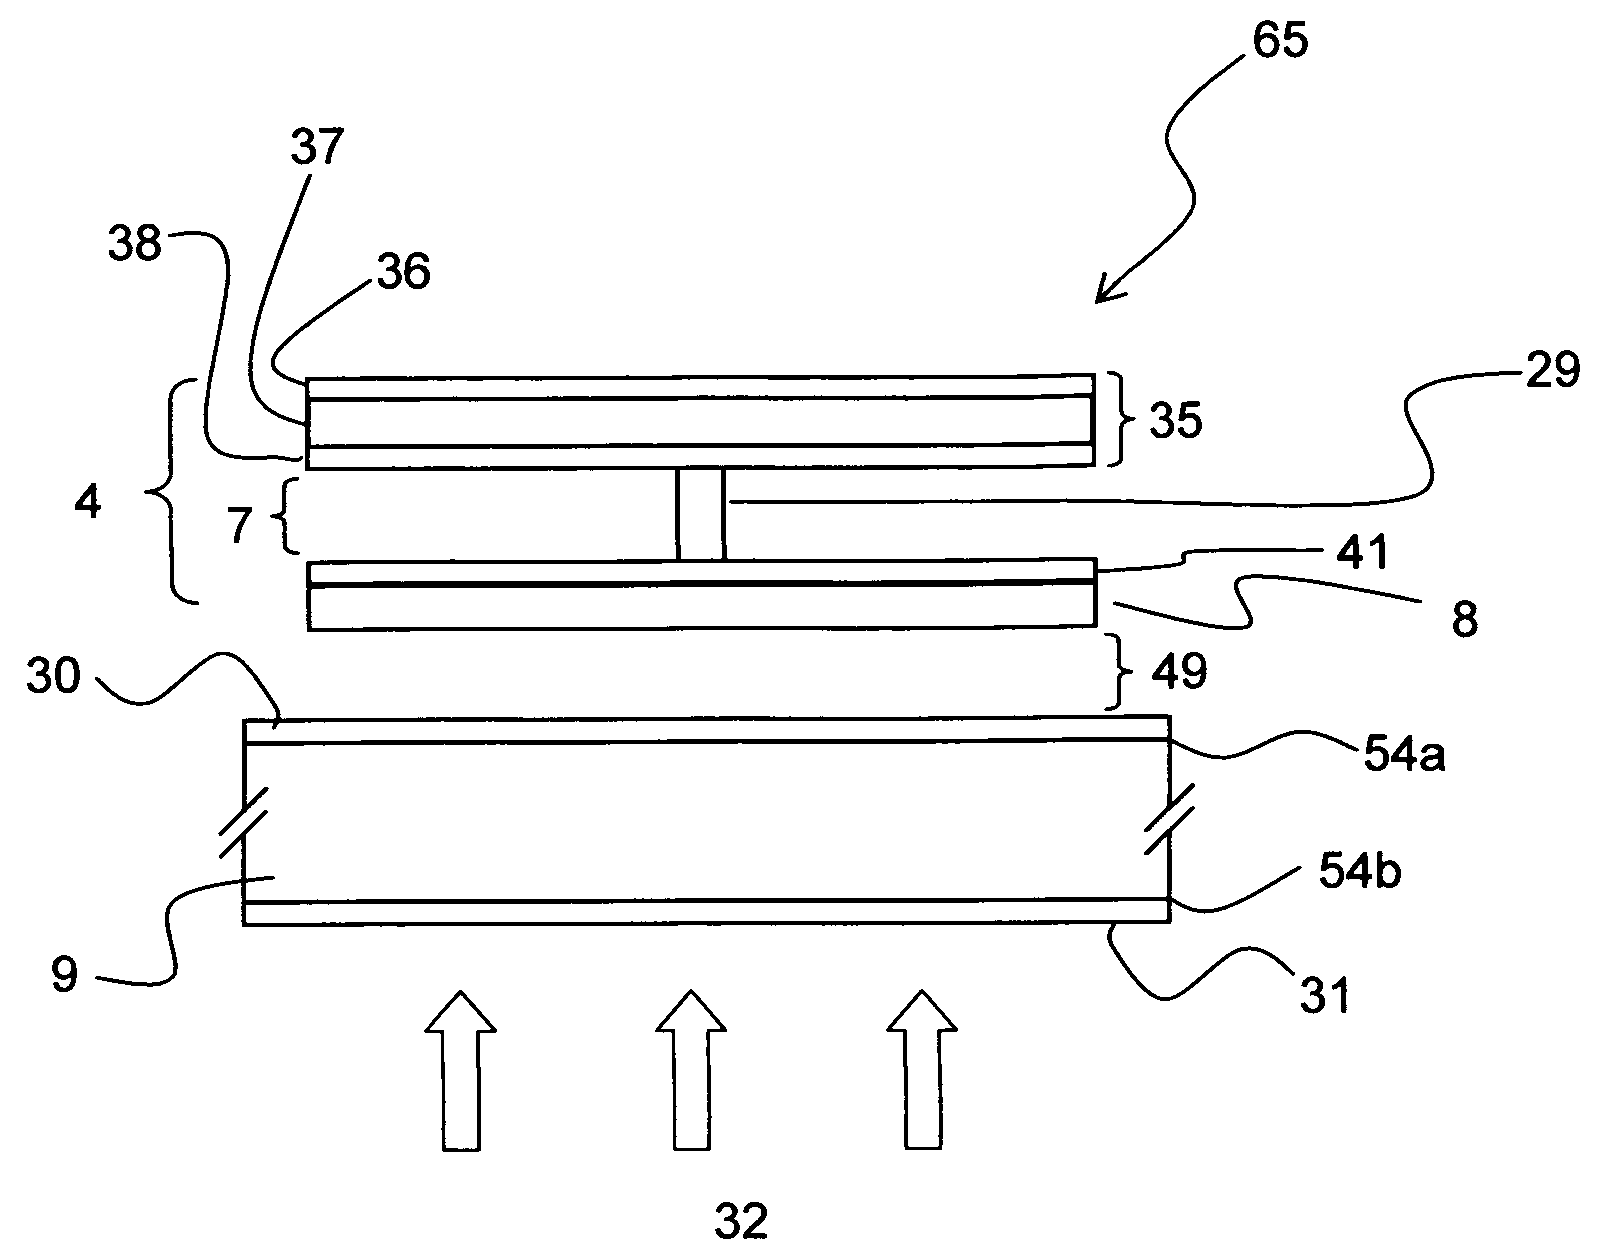 Micromechanical device for infrared sensing